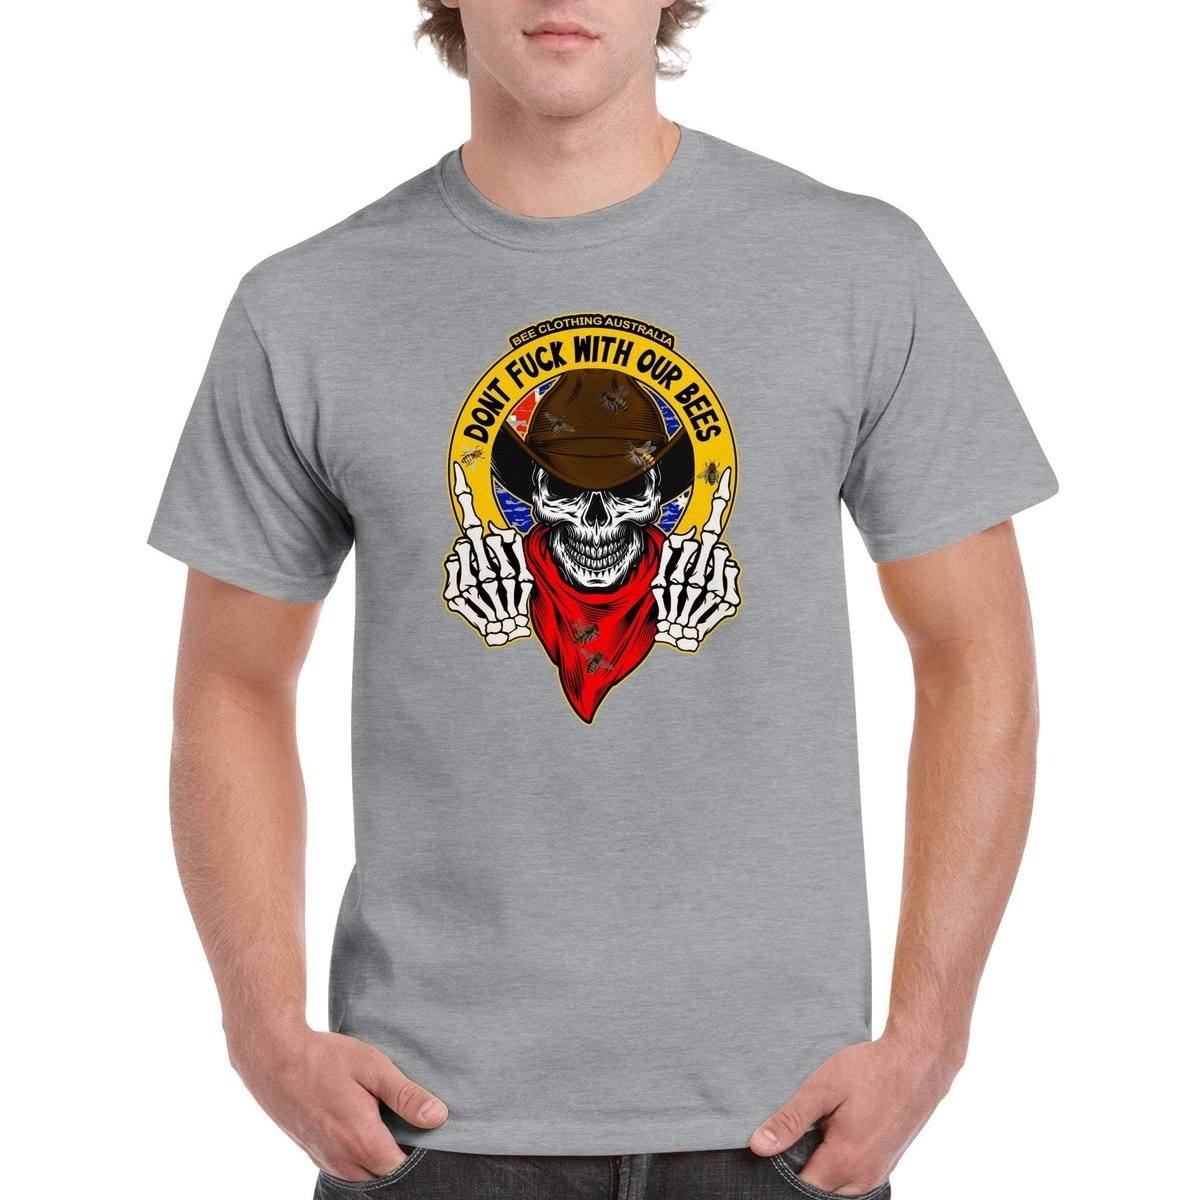 Dont Fuck With Our Bees T-Shirt - beekeeper Tshirt - Unisex Crewneck T-shirt Adults T-Shirts Unisex Sports Grey / S Bee Clothing Australia